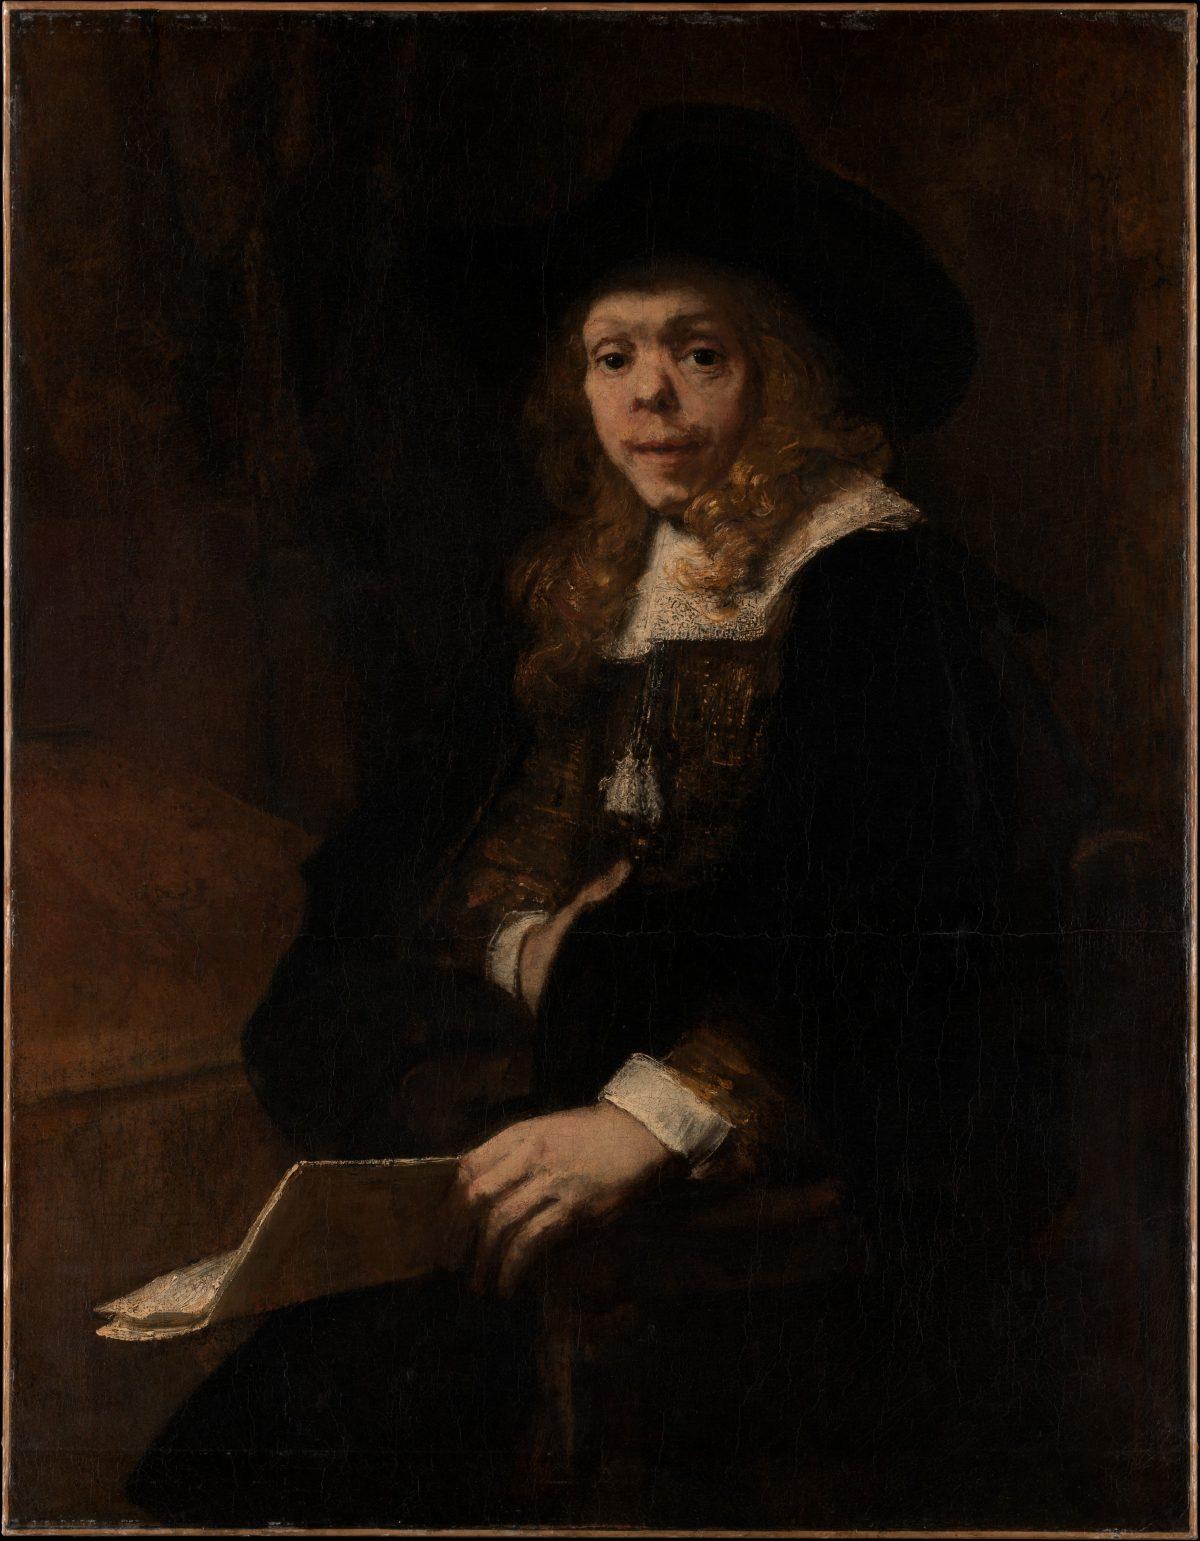 "Portrait of Gerard de Lairesse," 1665–67, by Rembrandt. Oil on canvas, 44 3/8 inches by 34 1/2 inches. Robert Lehman Collection, 1975. (The Metropolitan Museum of Art)